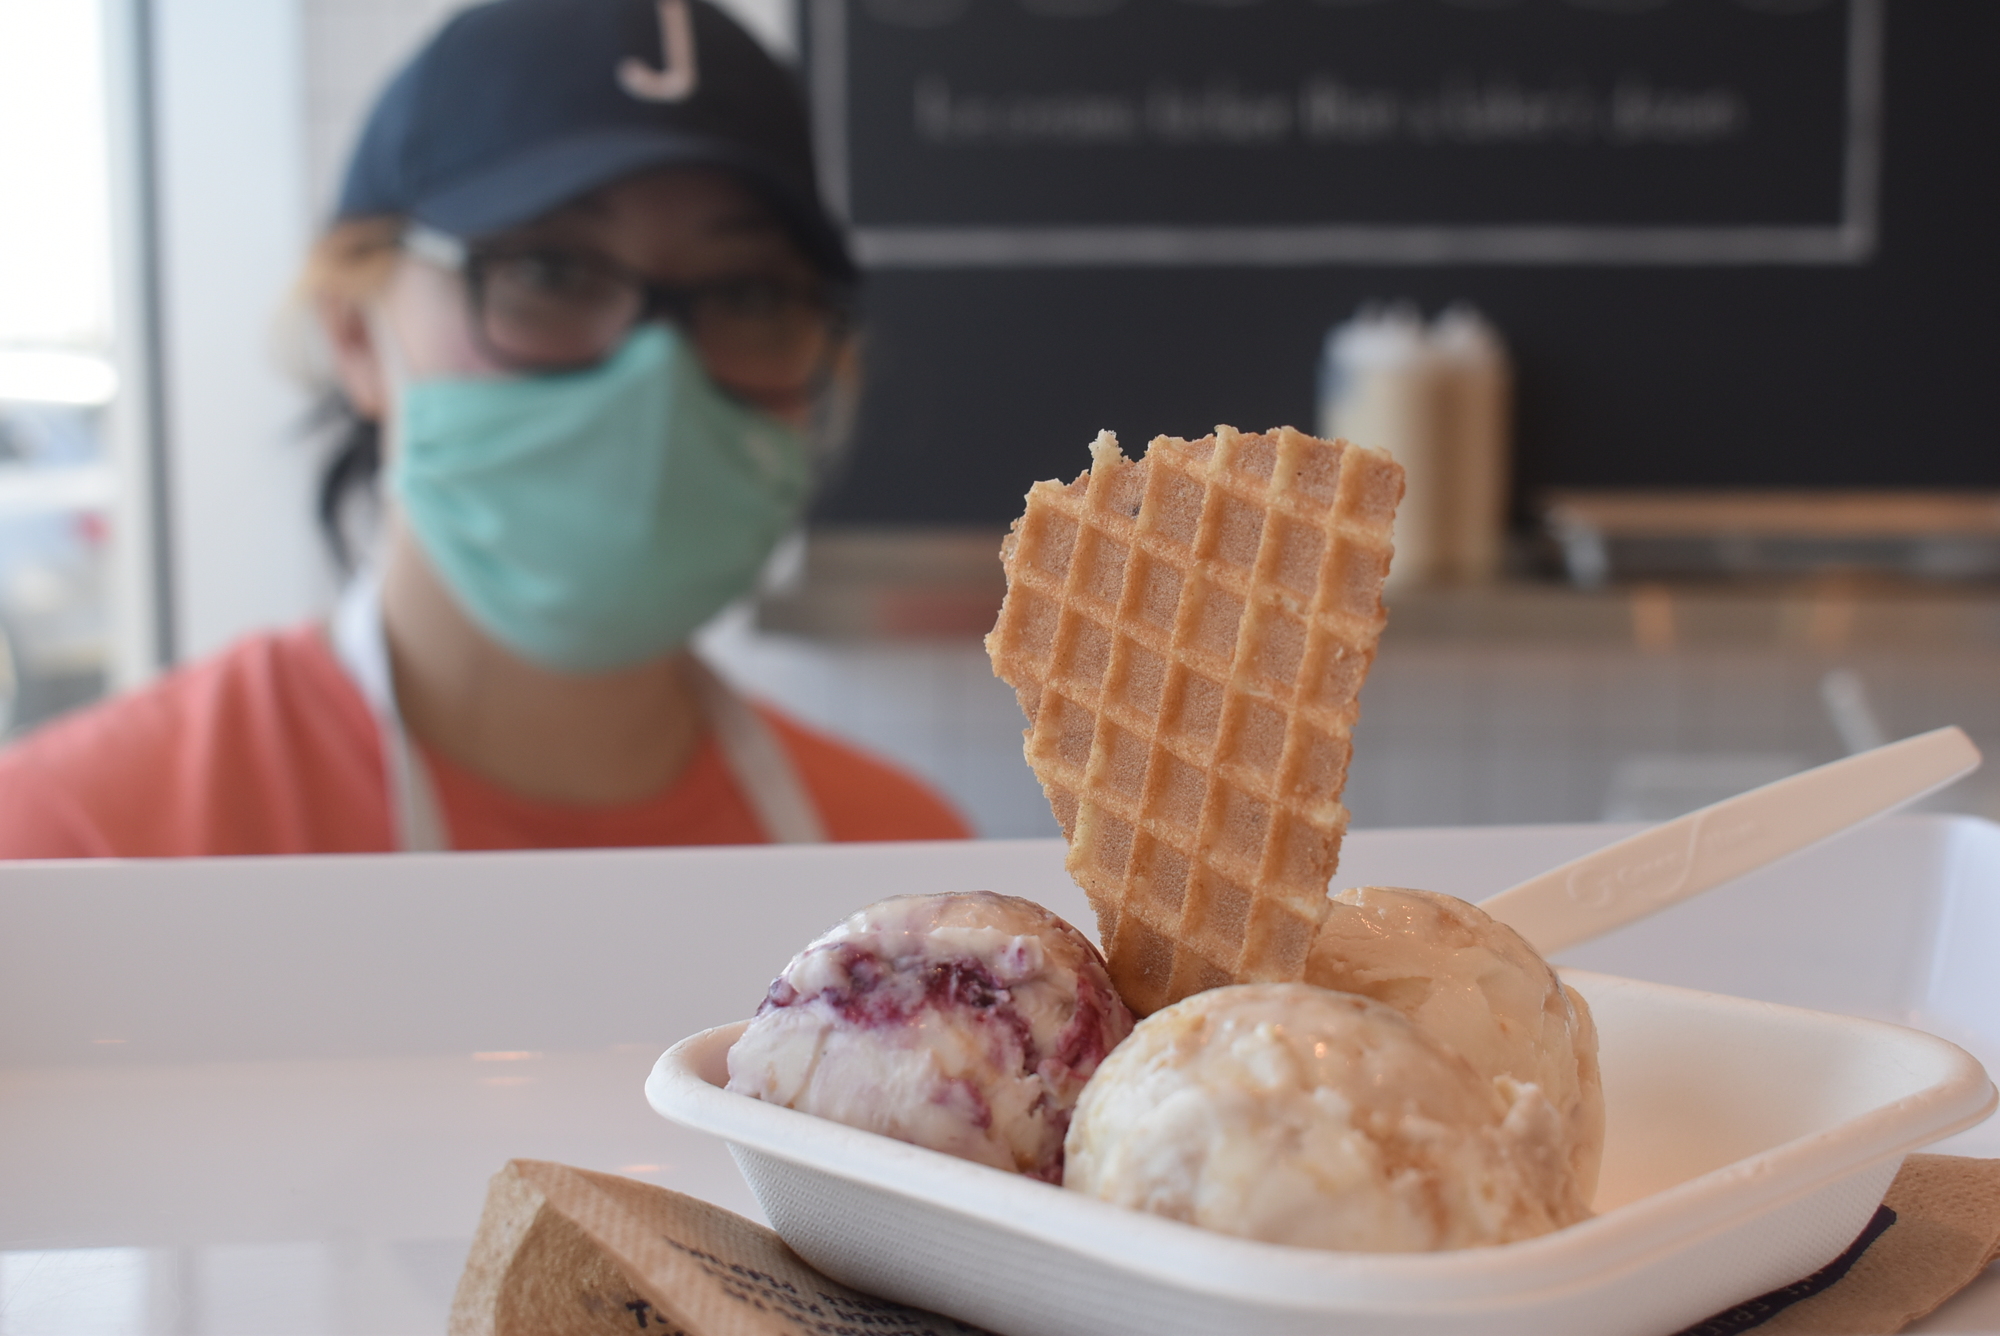 Jeni's Splendid Ice Creams Team Leader Kelly Barker serves an ice cream trio consisting of gooey butter cake, brambleberry crisp and brown butter almond brittle.